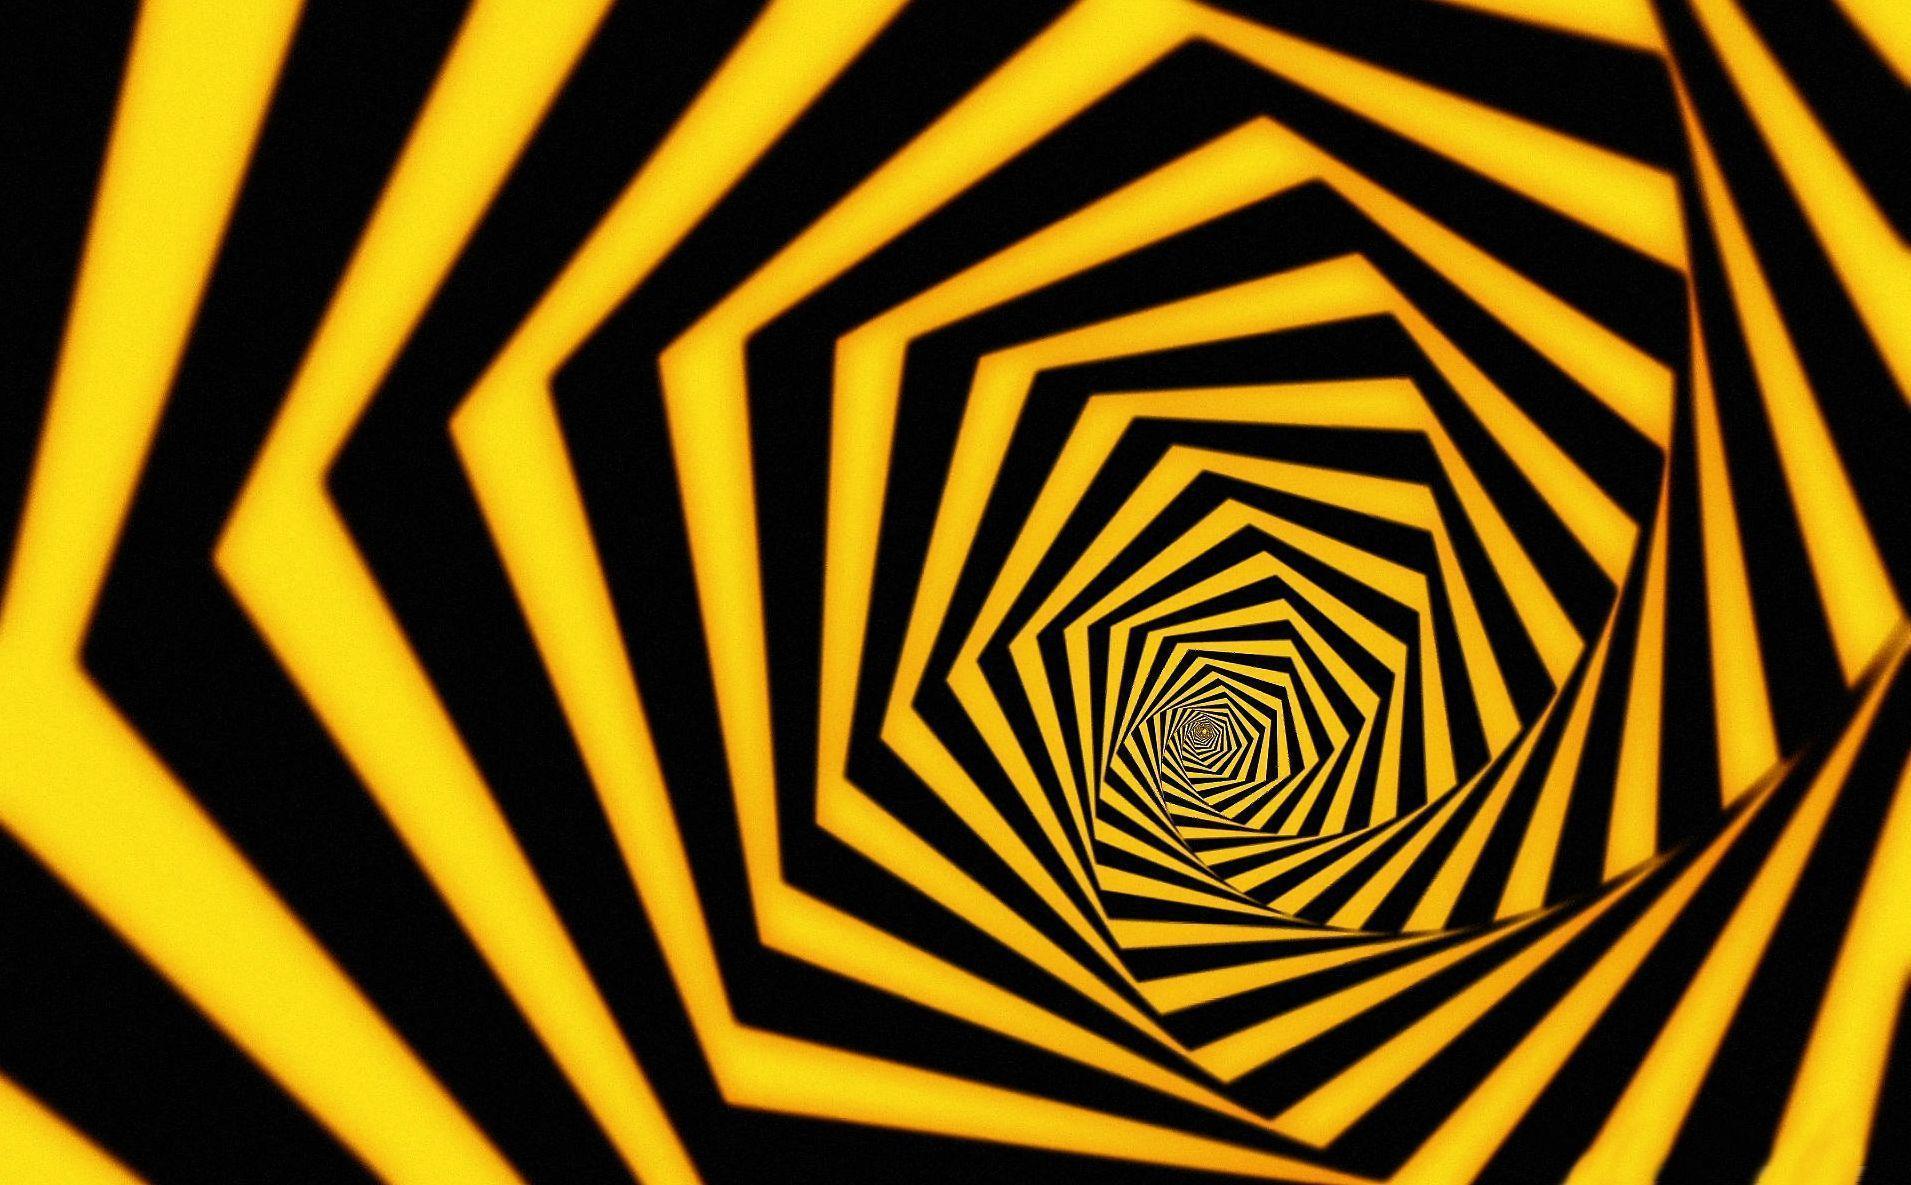 1680x1050px Black And Yellow (816.38 KB).02.2015